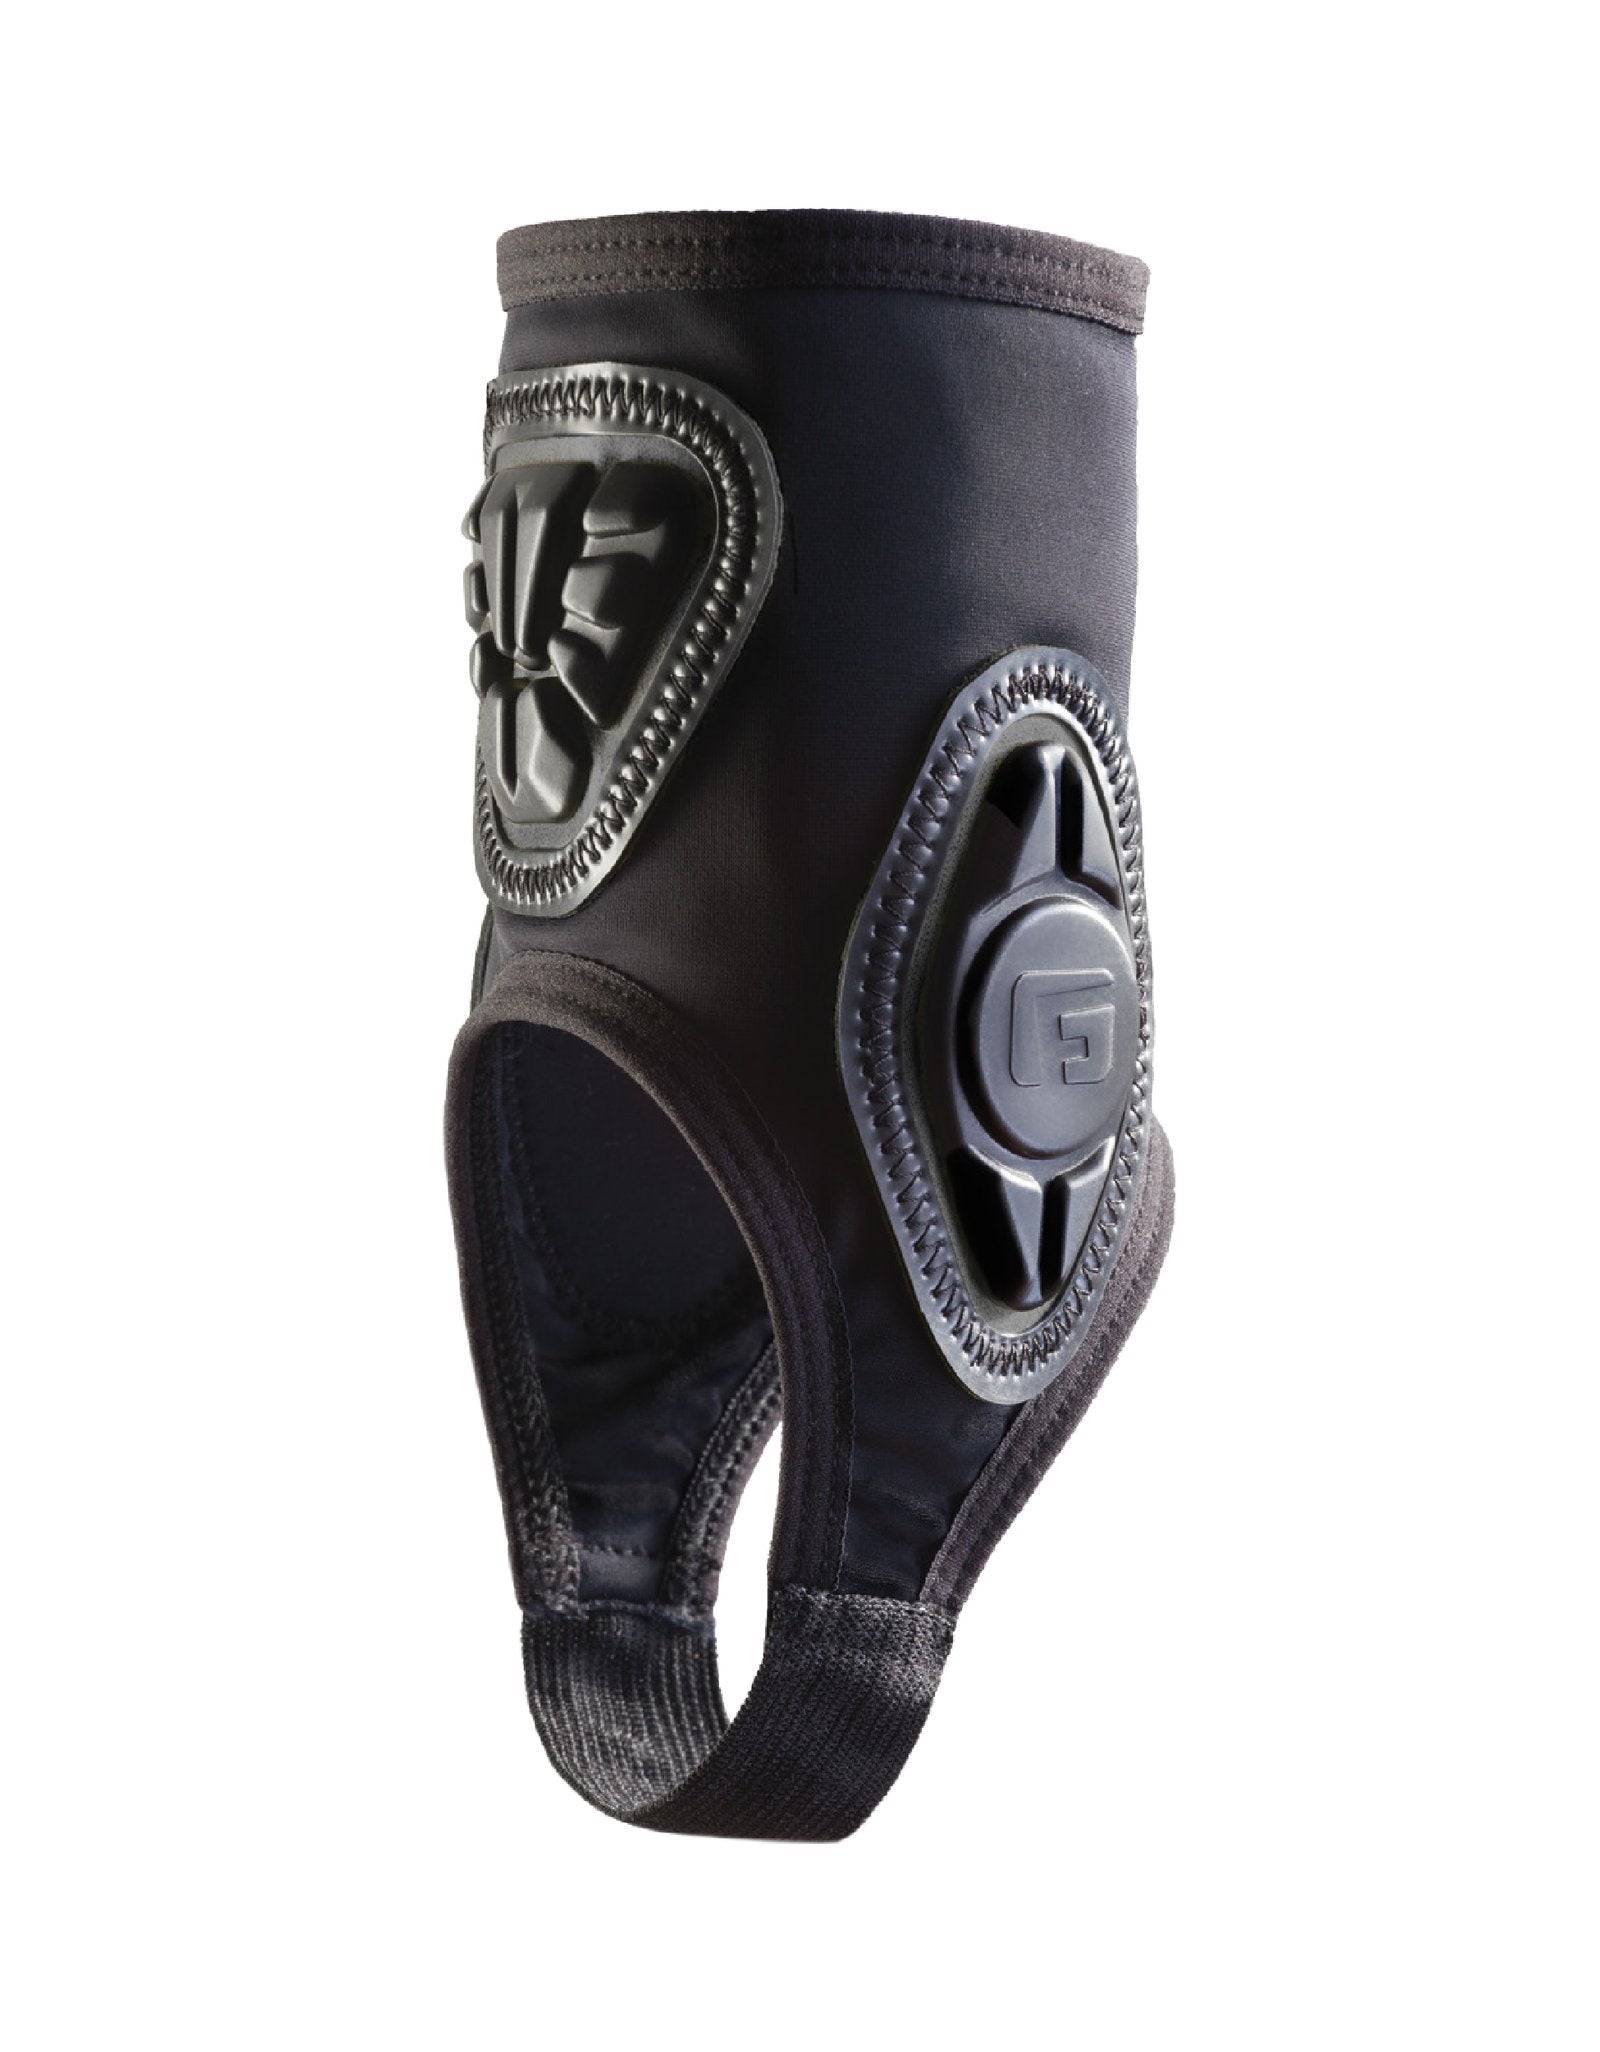 G-Form Pro Ankle Guard, 2020 - Cycle Closet